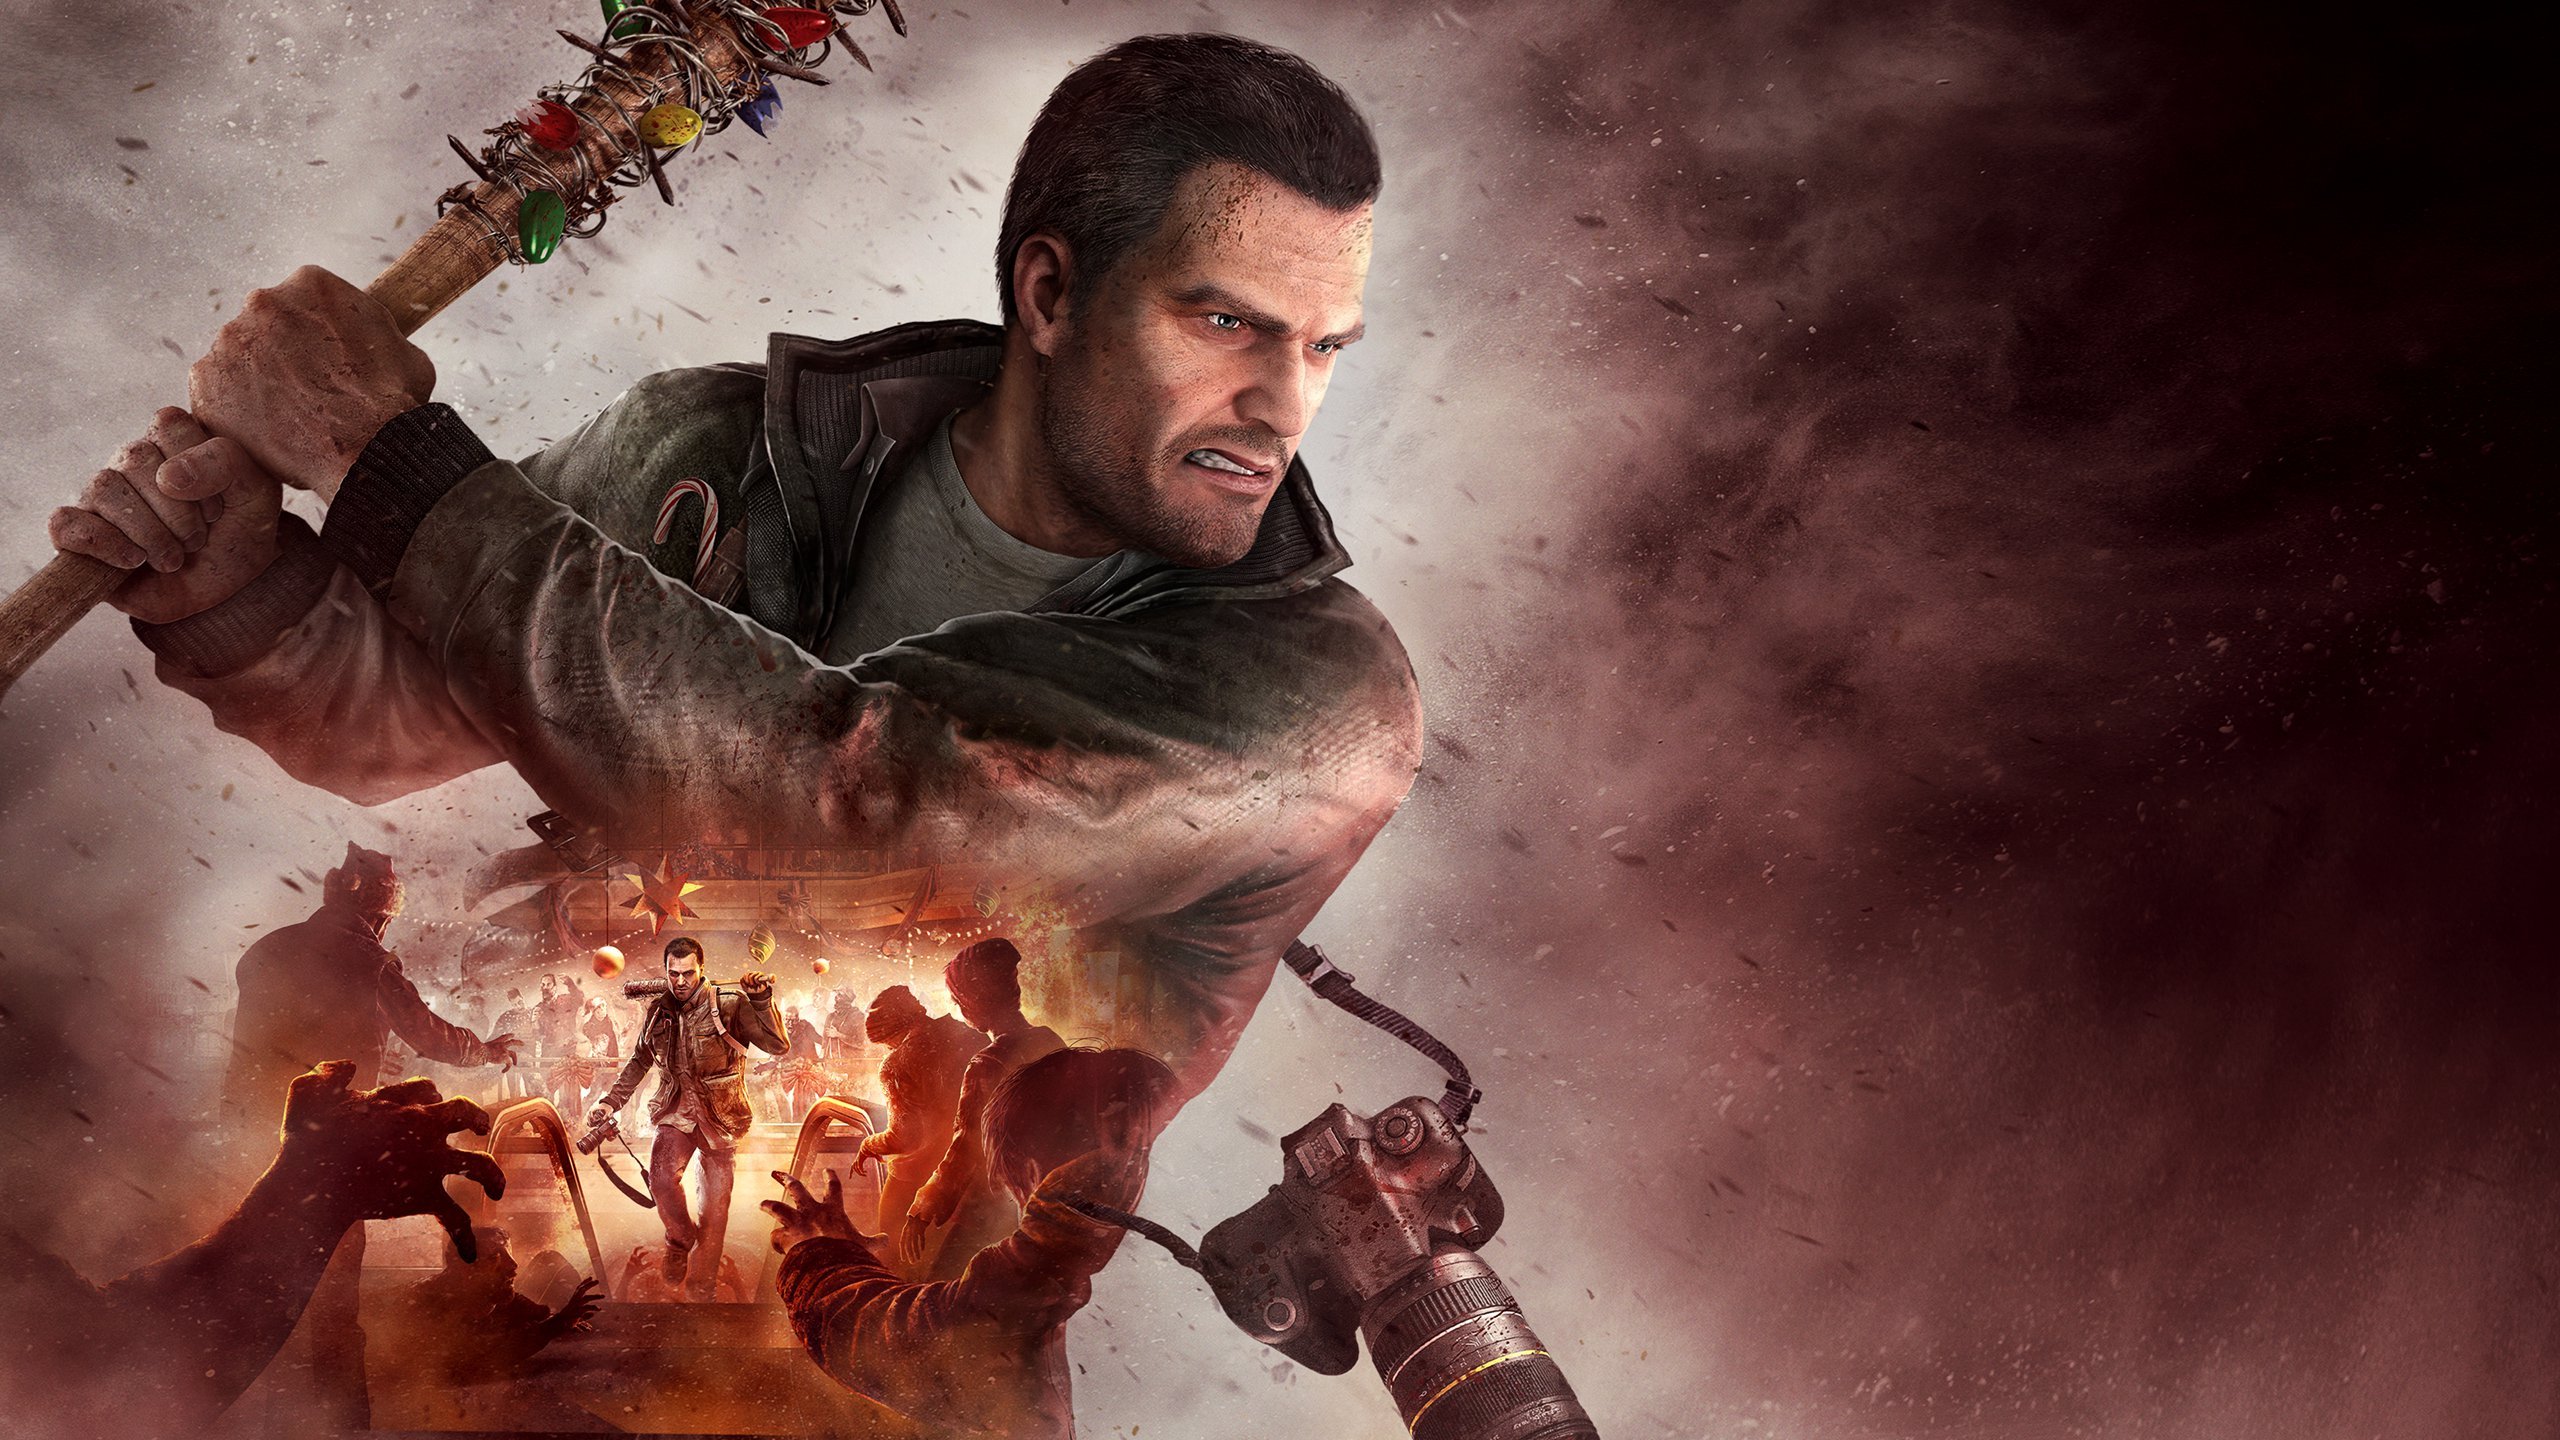 Review: Dead Rising 3 packs in the zombies and the next-gen fun